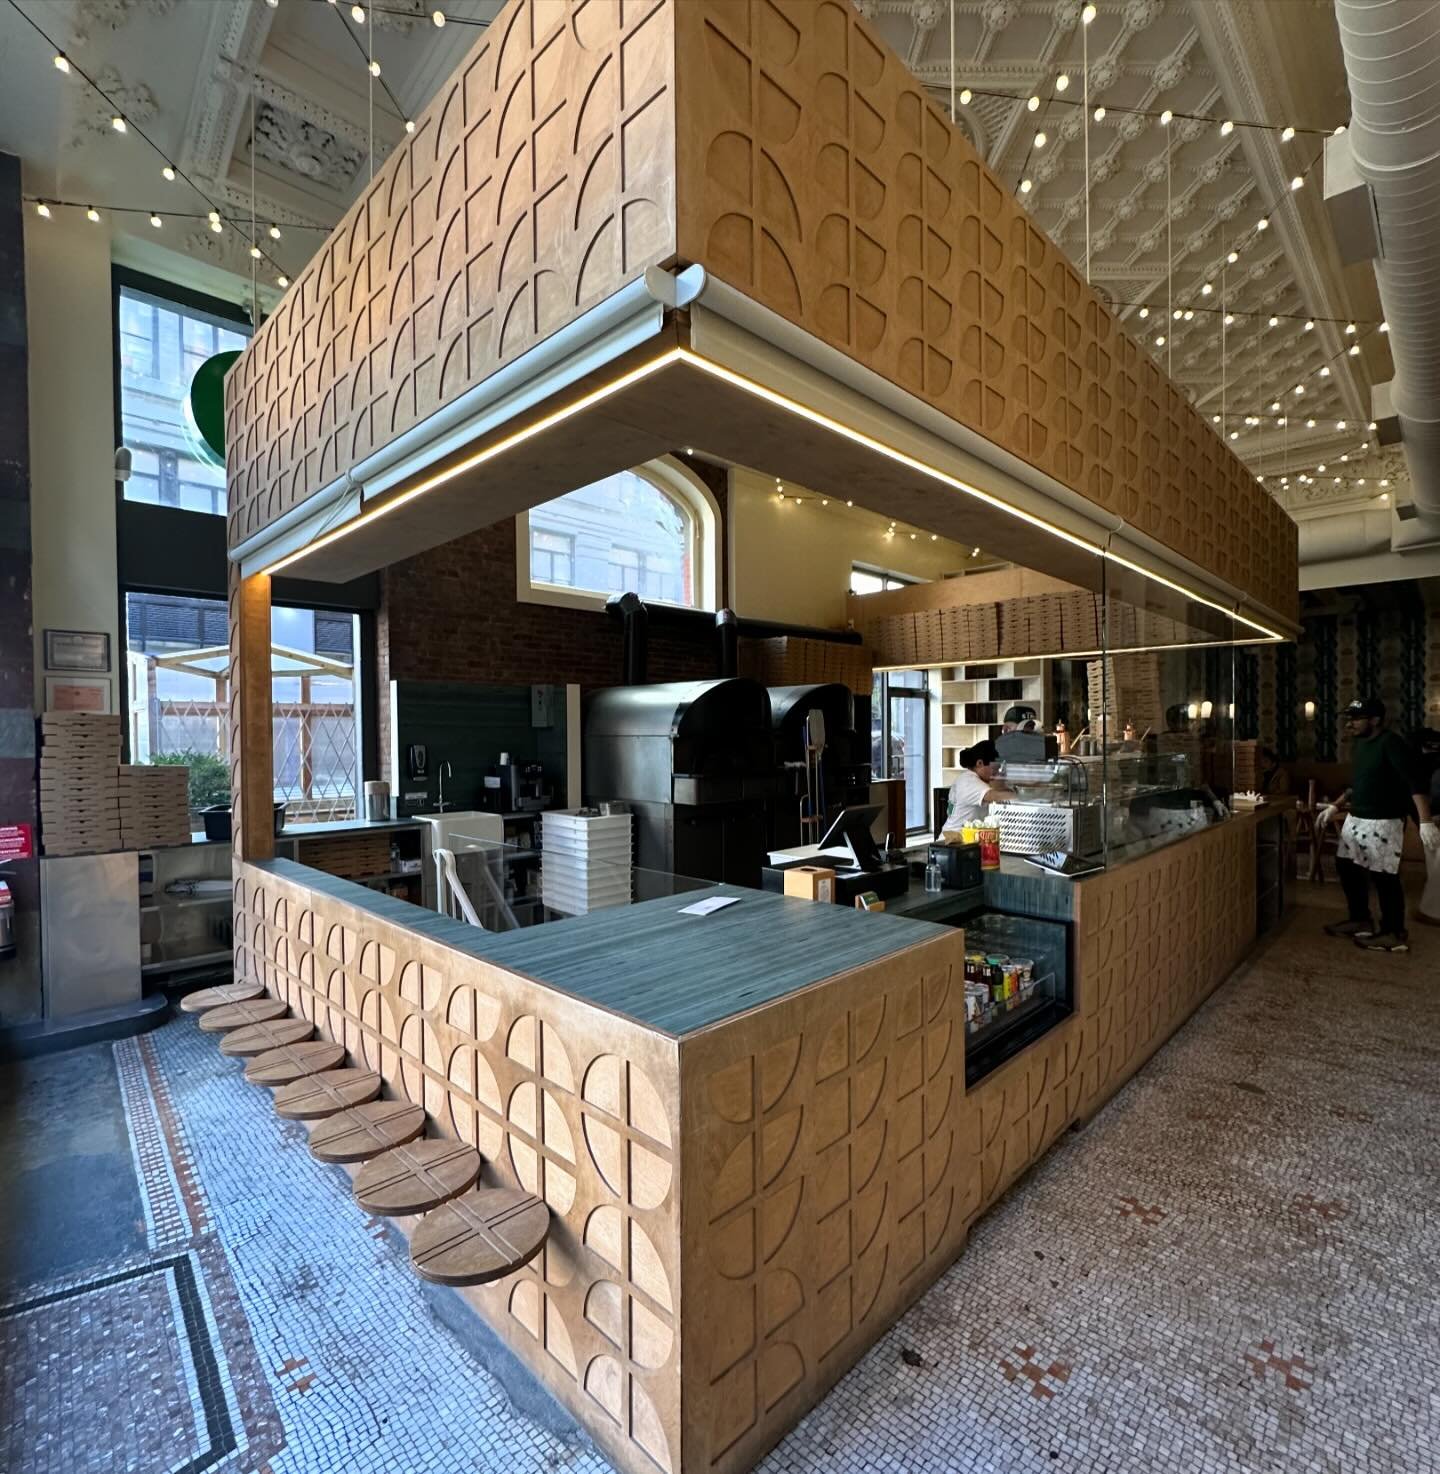 IL CHIOSCHETTO: our restaurants are designed and modeled after the &ldquo;CHIOSCHETTO&rdquo; napoletano, a little kiosk from which we sell pizza, calzoni and similar delicious food.

The inside-outside concept of our University place restaurant trans